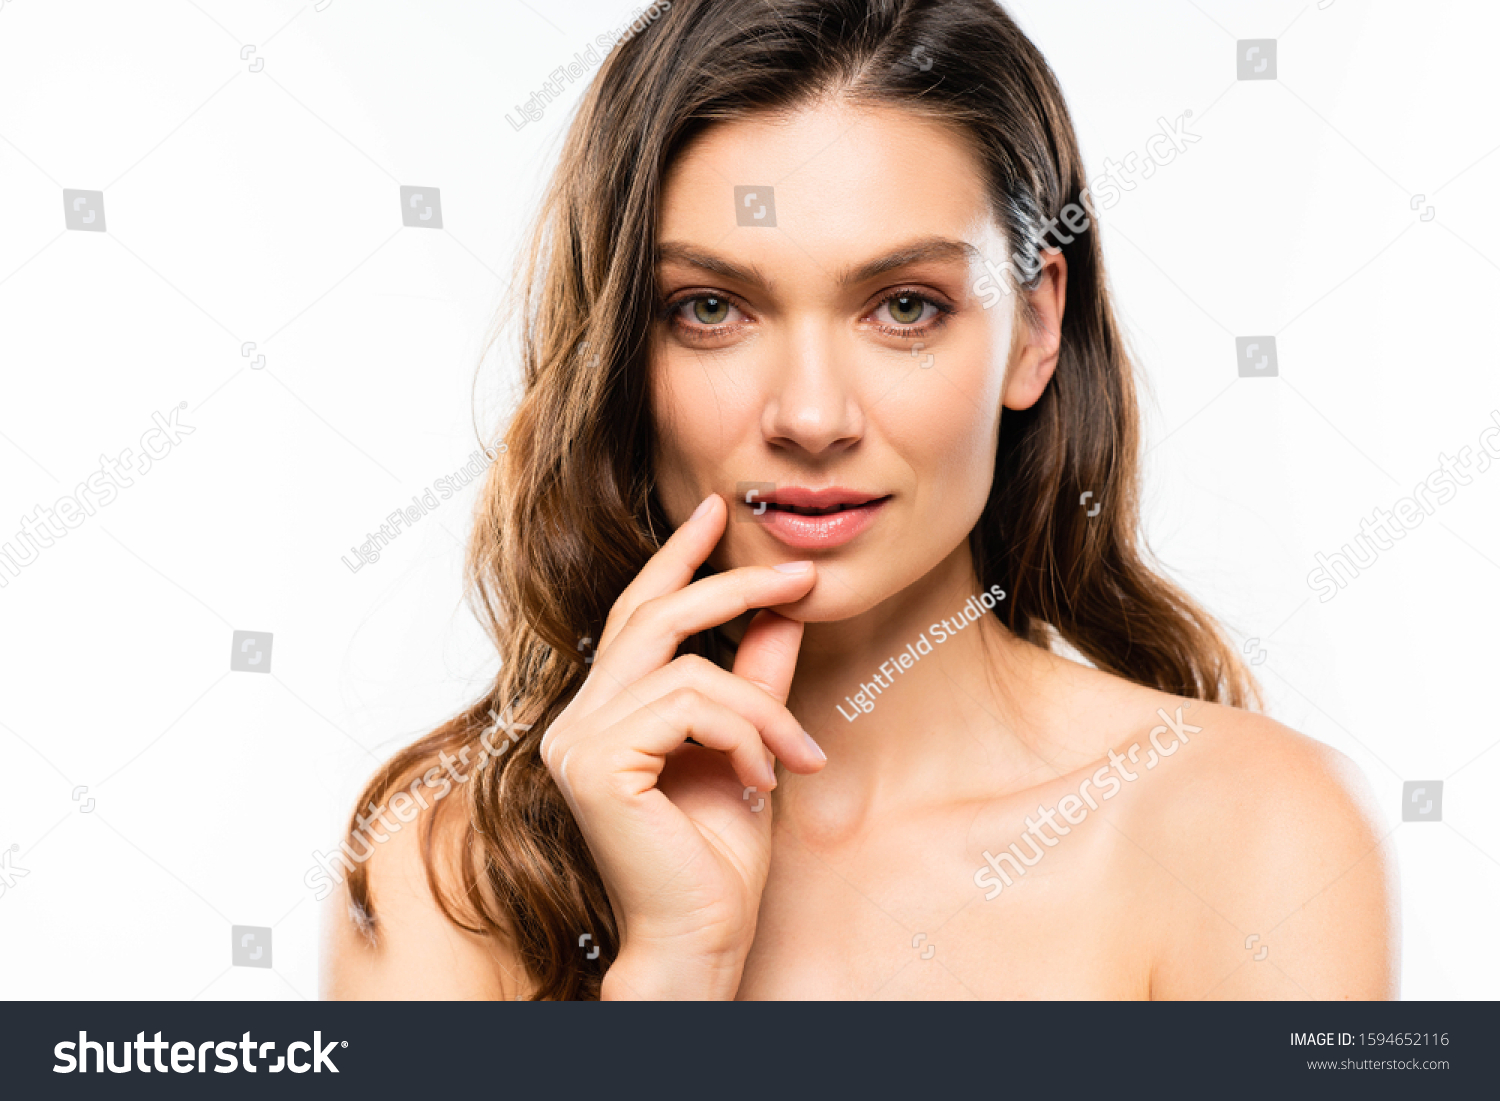 Attractive Naked Woman Perfect Skin Isolated Stock Photo Shutterstock